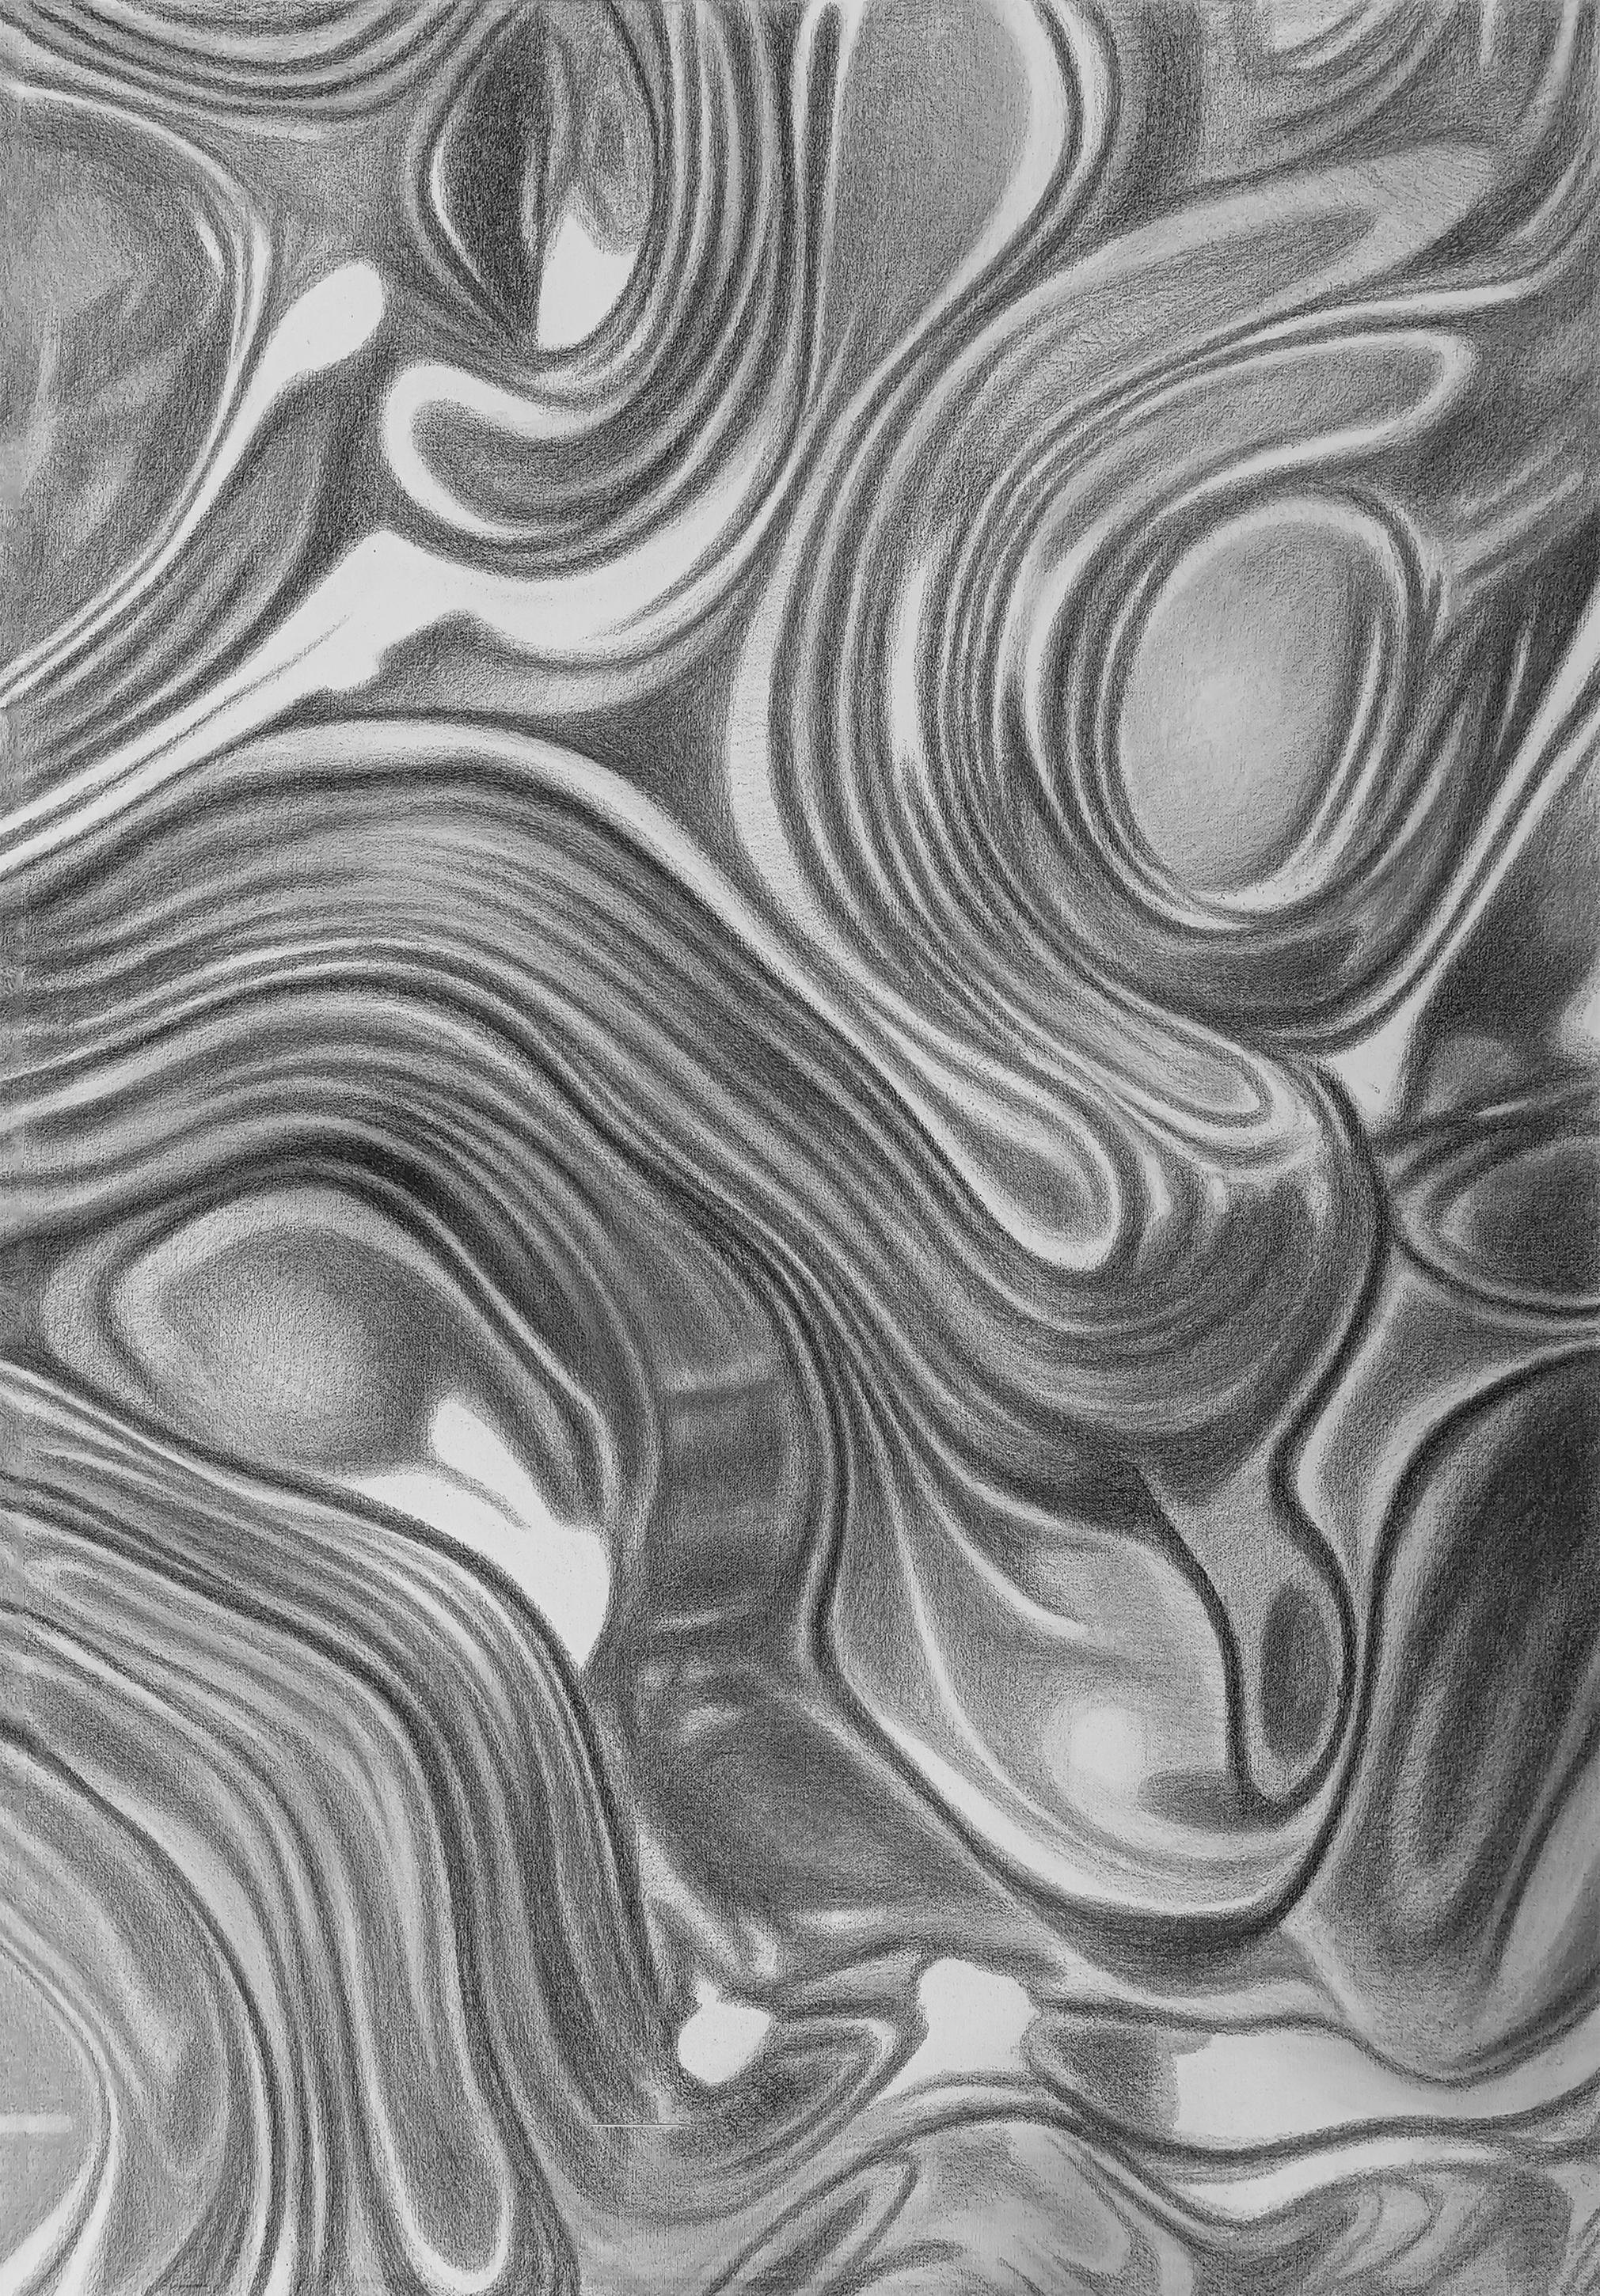 James Bonachea Guerra Abstract Drawing - Fluidos. Painting From the series Plato’s Heaven.  Charcoal on canvas